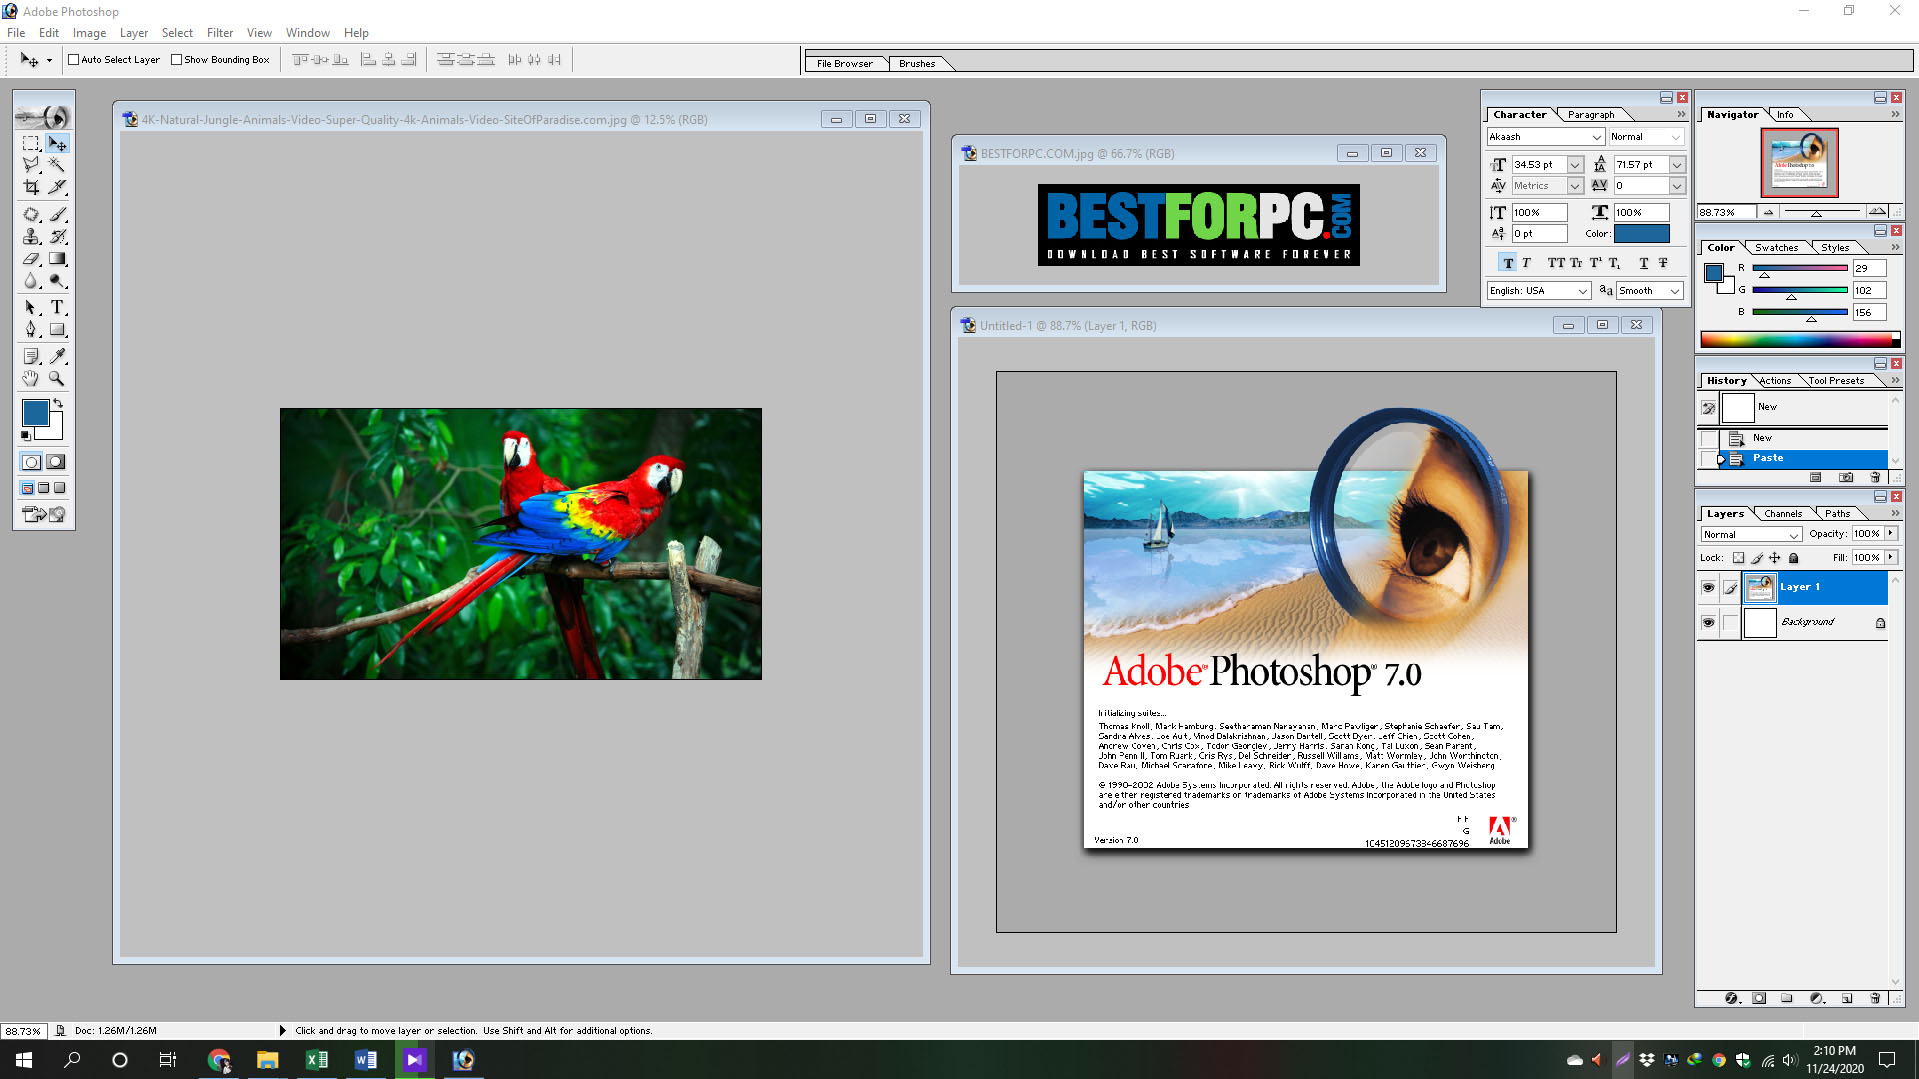 adobe photoshop 7.0 download free full version for windows xp